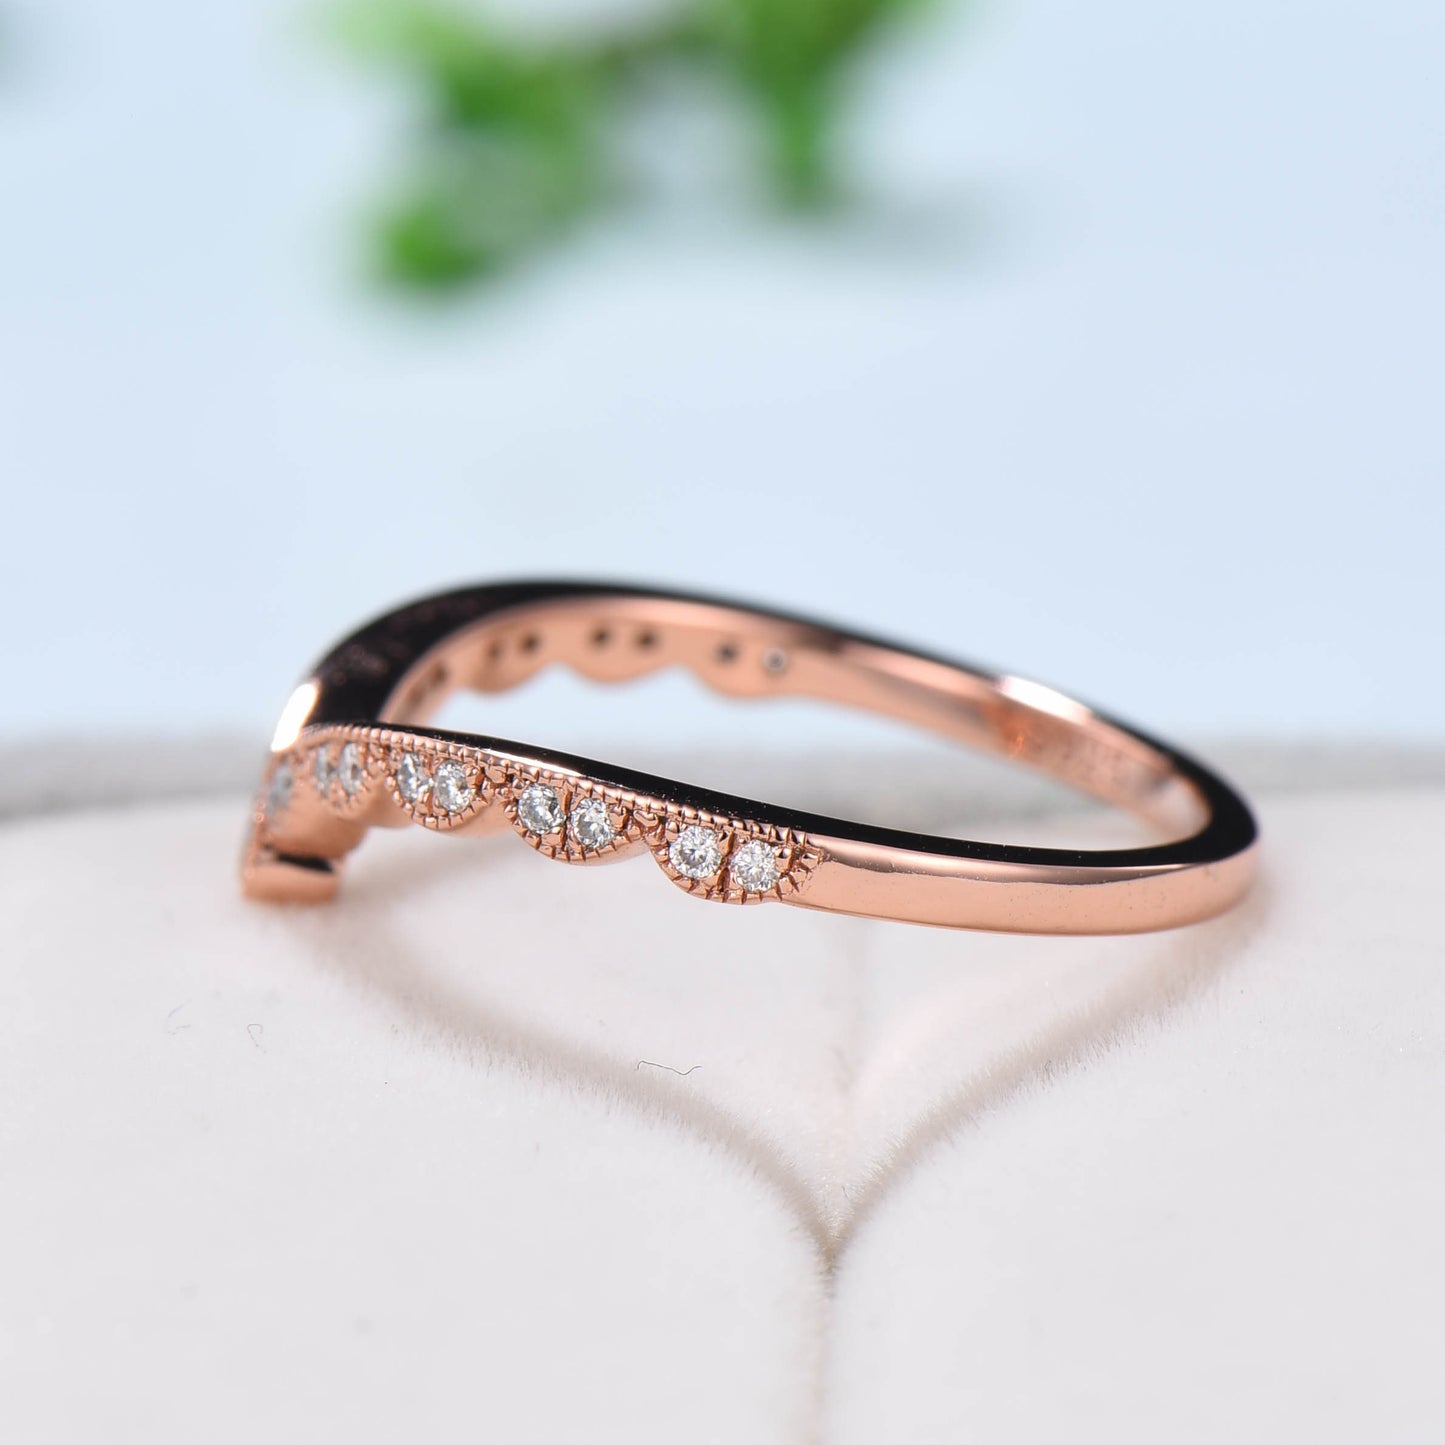 Art deco dainty curved Diamond wedding band Unique rose gold mulgrain stacking band art deco moissanite matching band Anniversary Gift - PENFINE